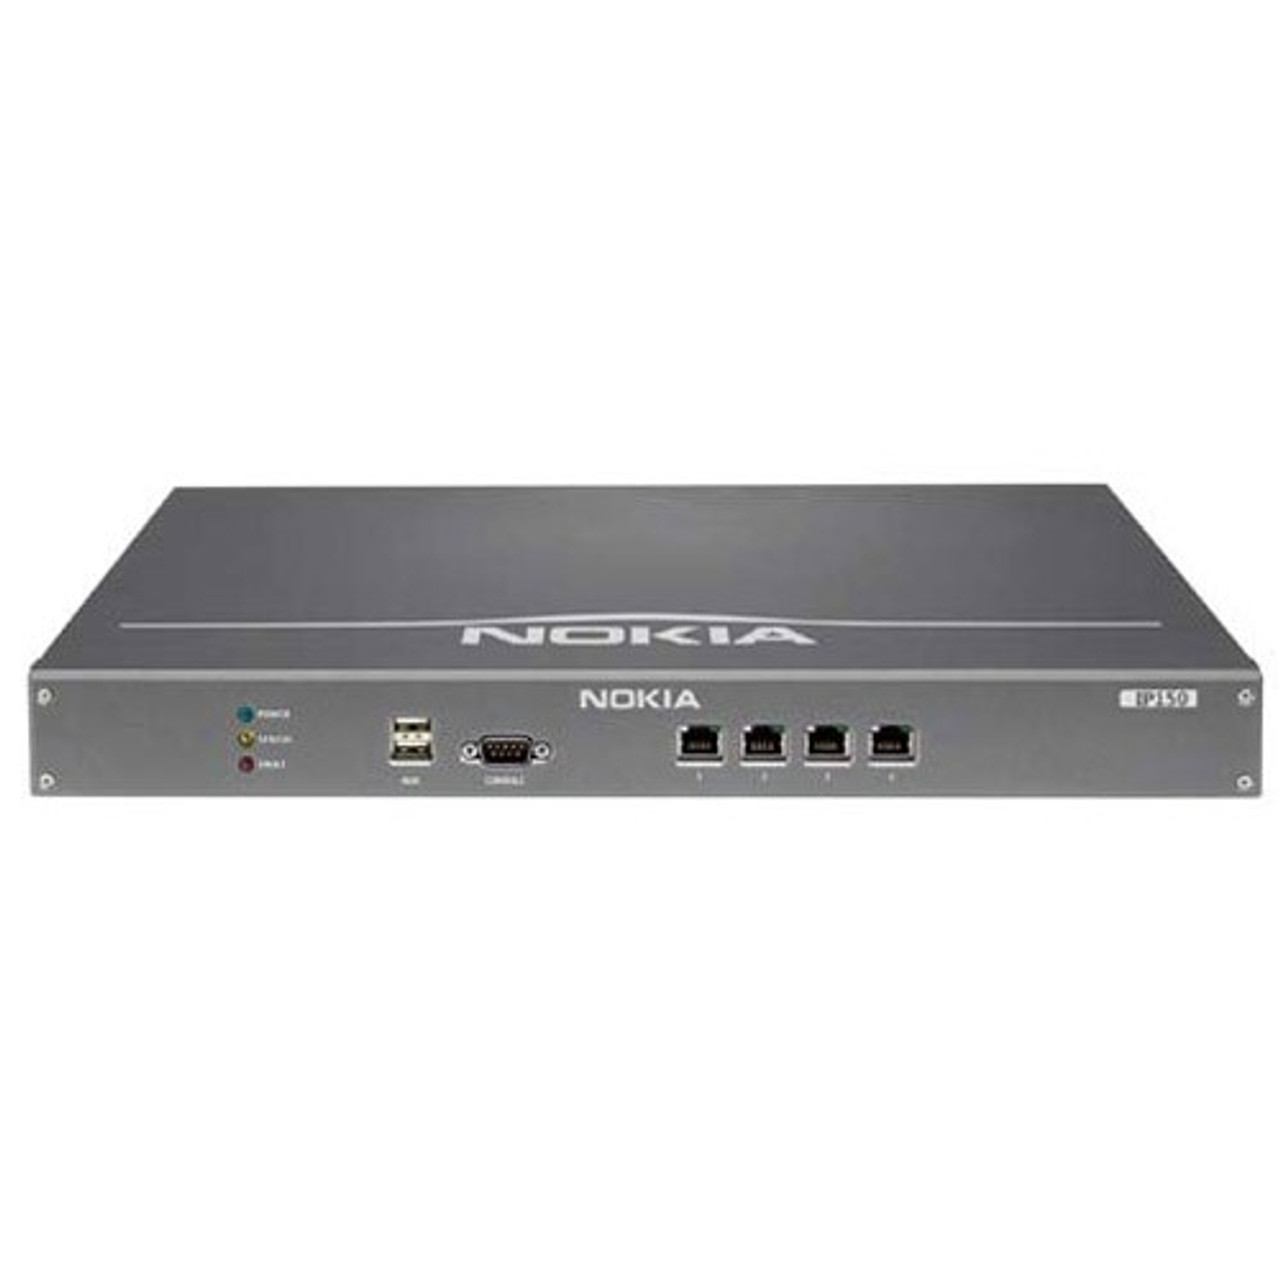 NBB0150000 Nokia IP150 Disk based Security Appliance with 1GB DRAM & 40GB Hard Disk Drive